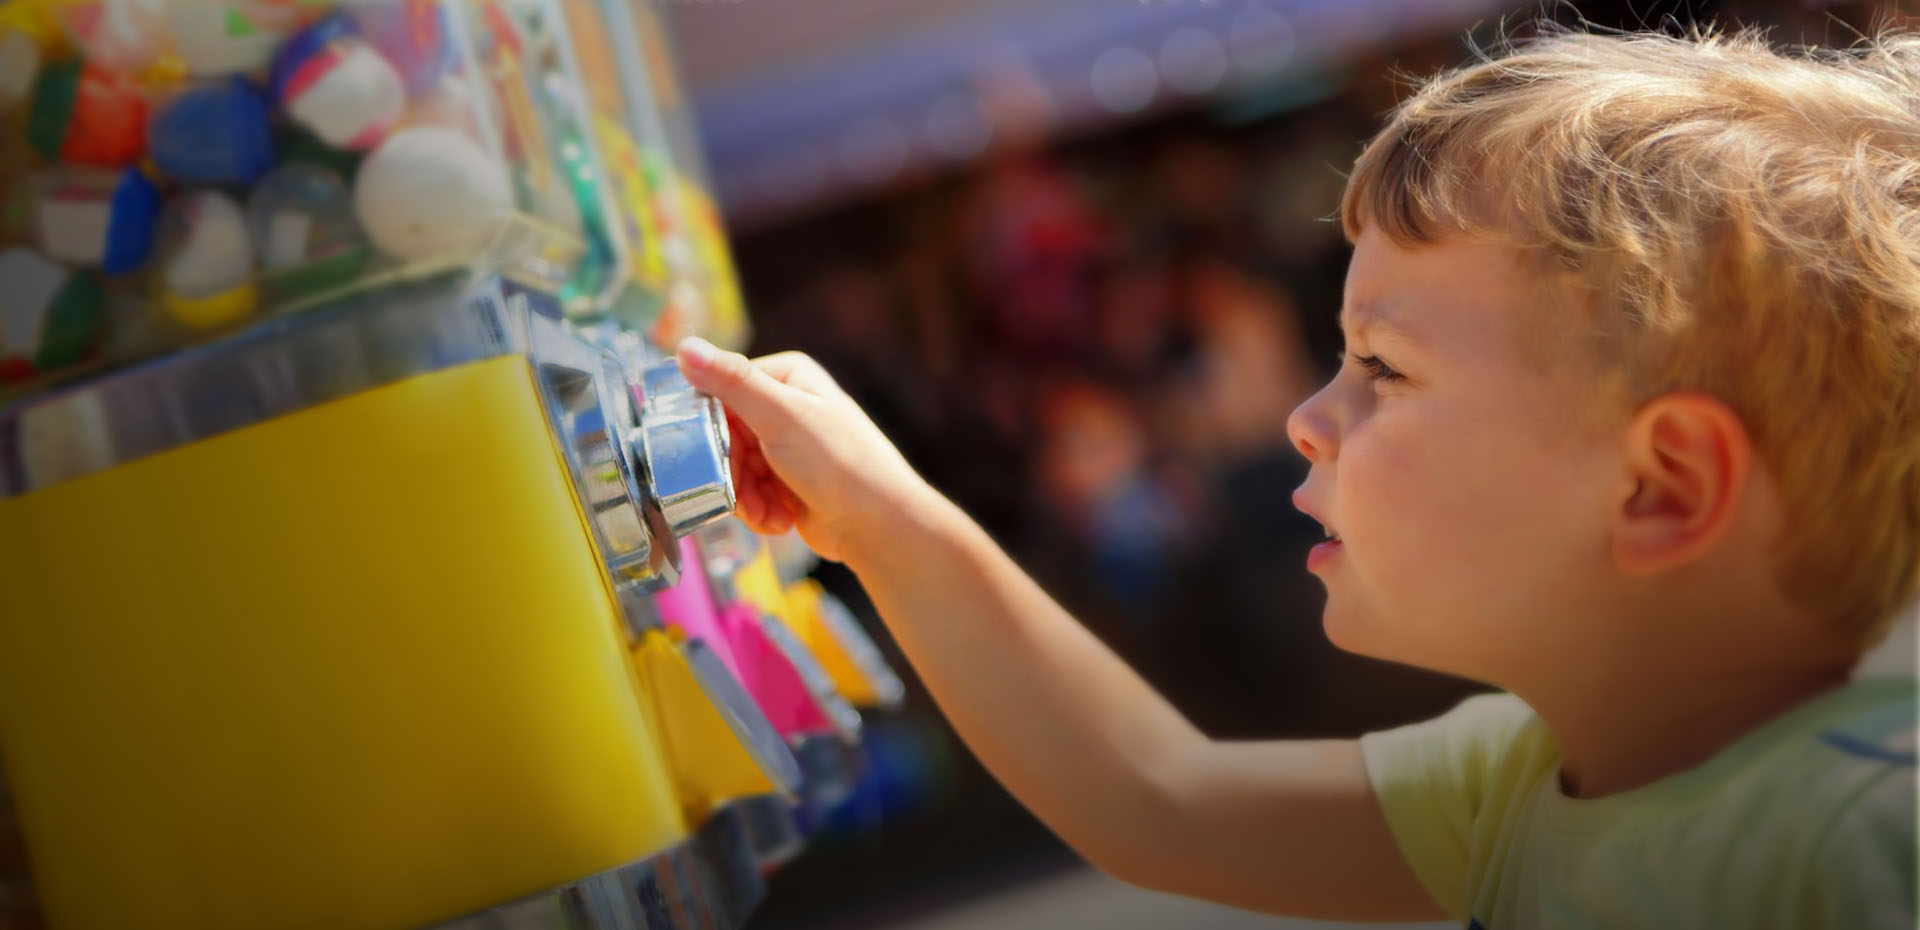 Installers Of Toys Vending Machines For Restaurants Leicestershire